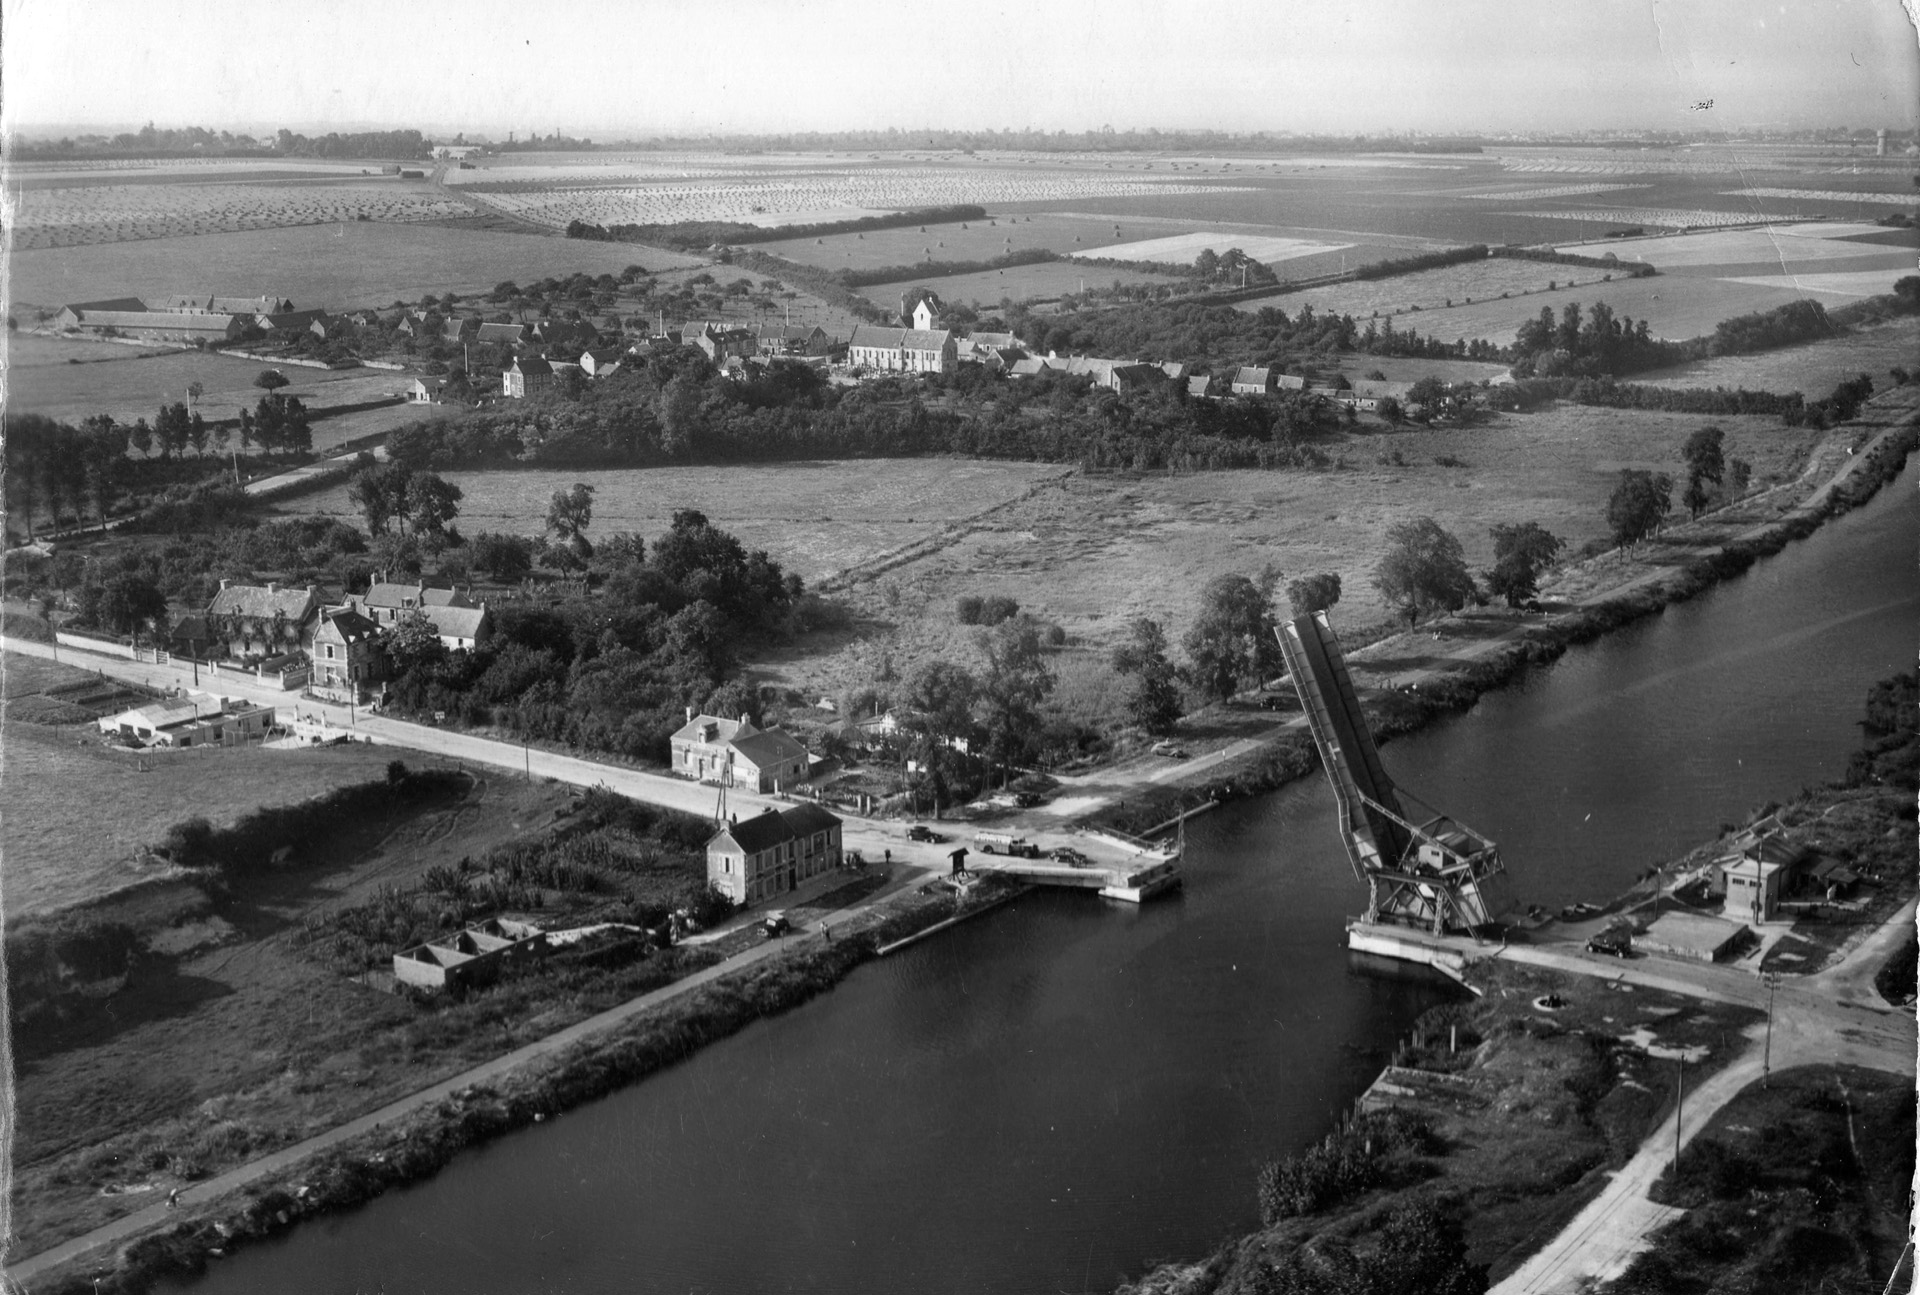 This post-war photograph shows the village of Benouville at left, Cafe Gondree next to the canal, and the drawbridge over the Caen Canal. After they captured the bridge, the British transformed the cafe into an aid station. 